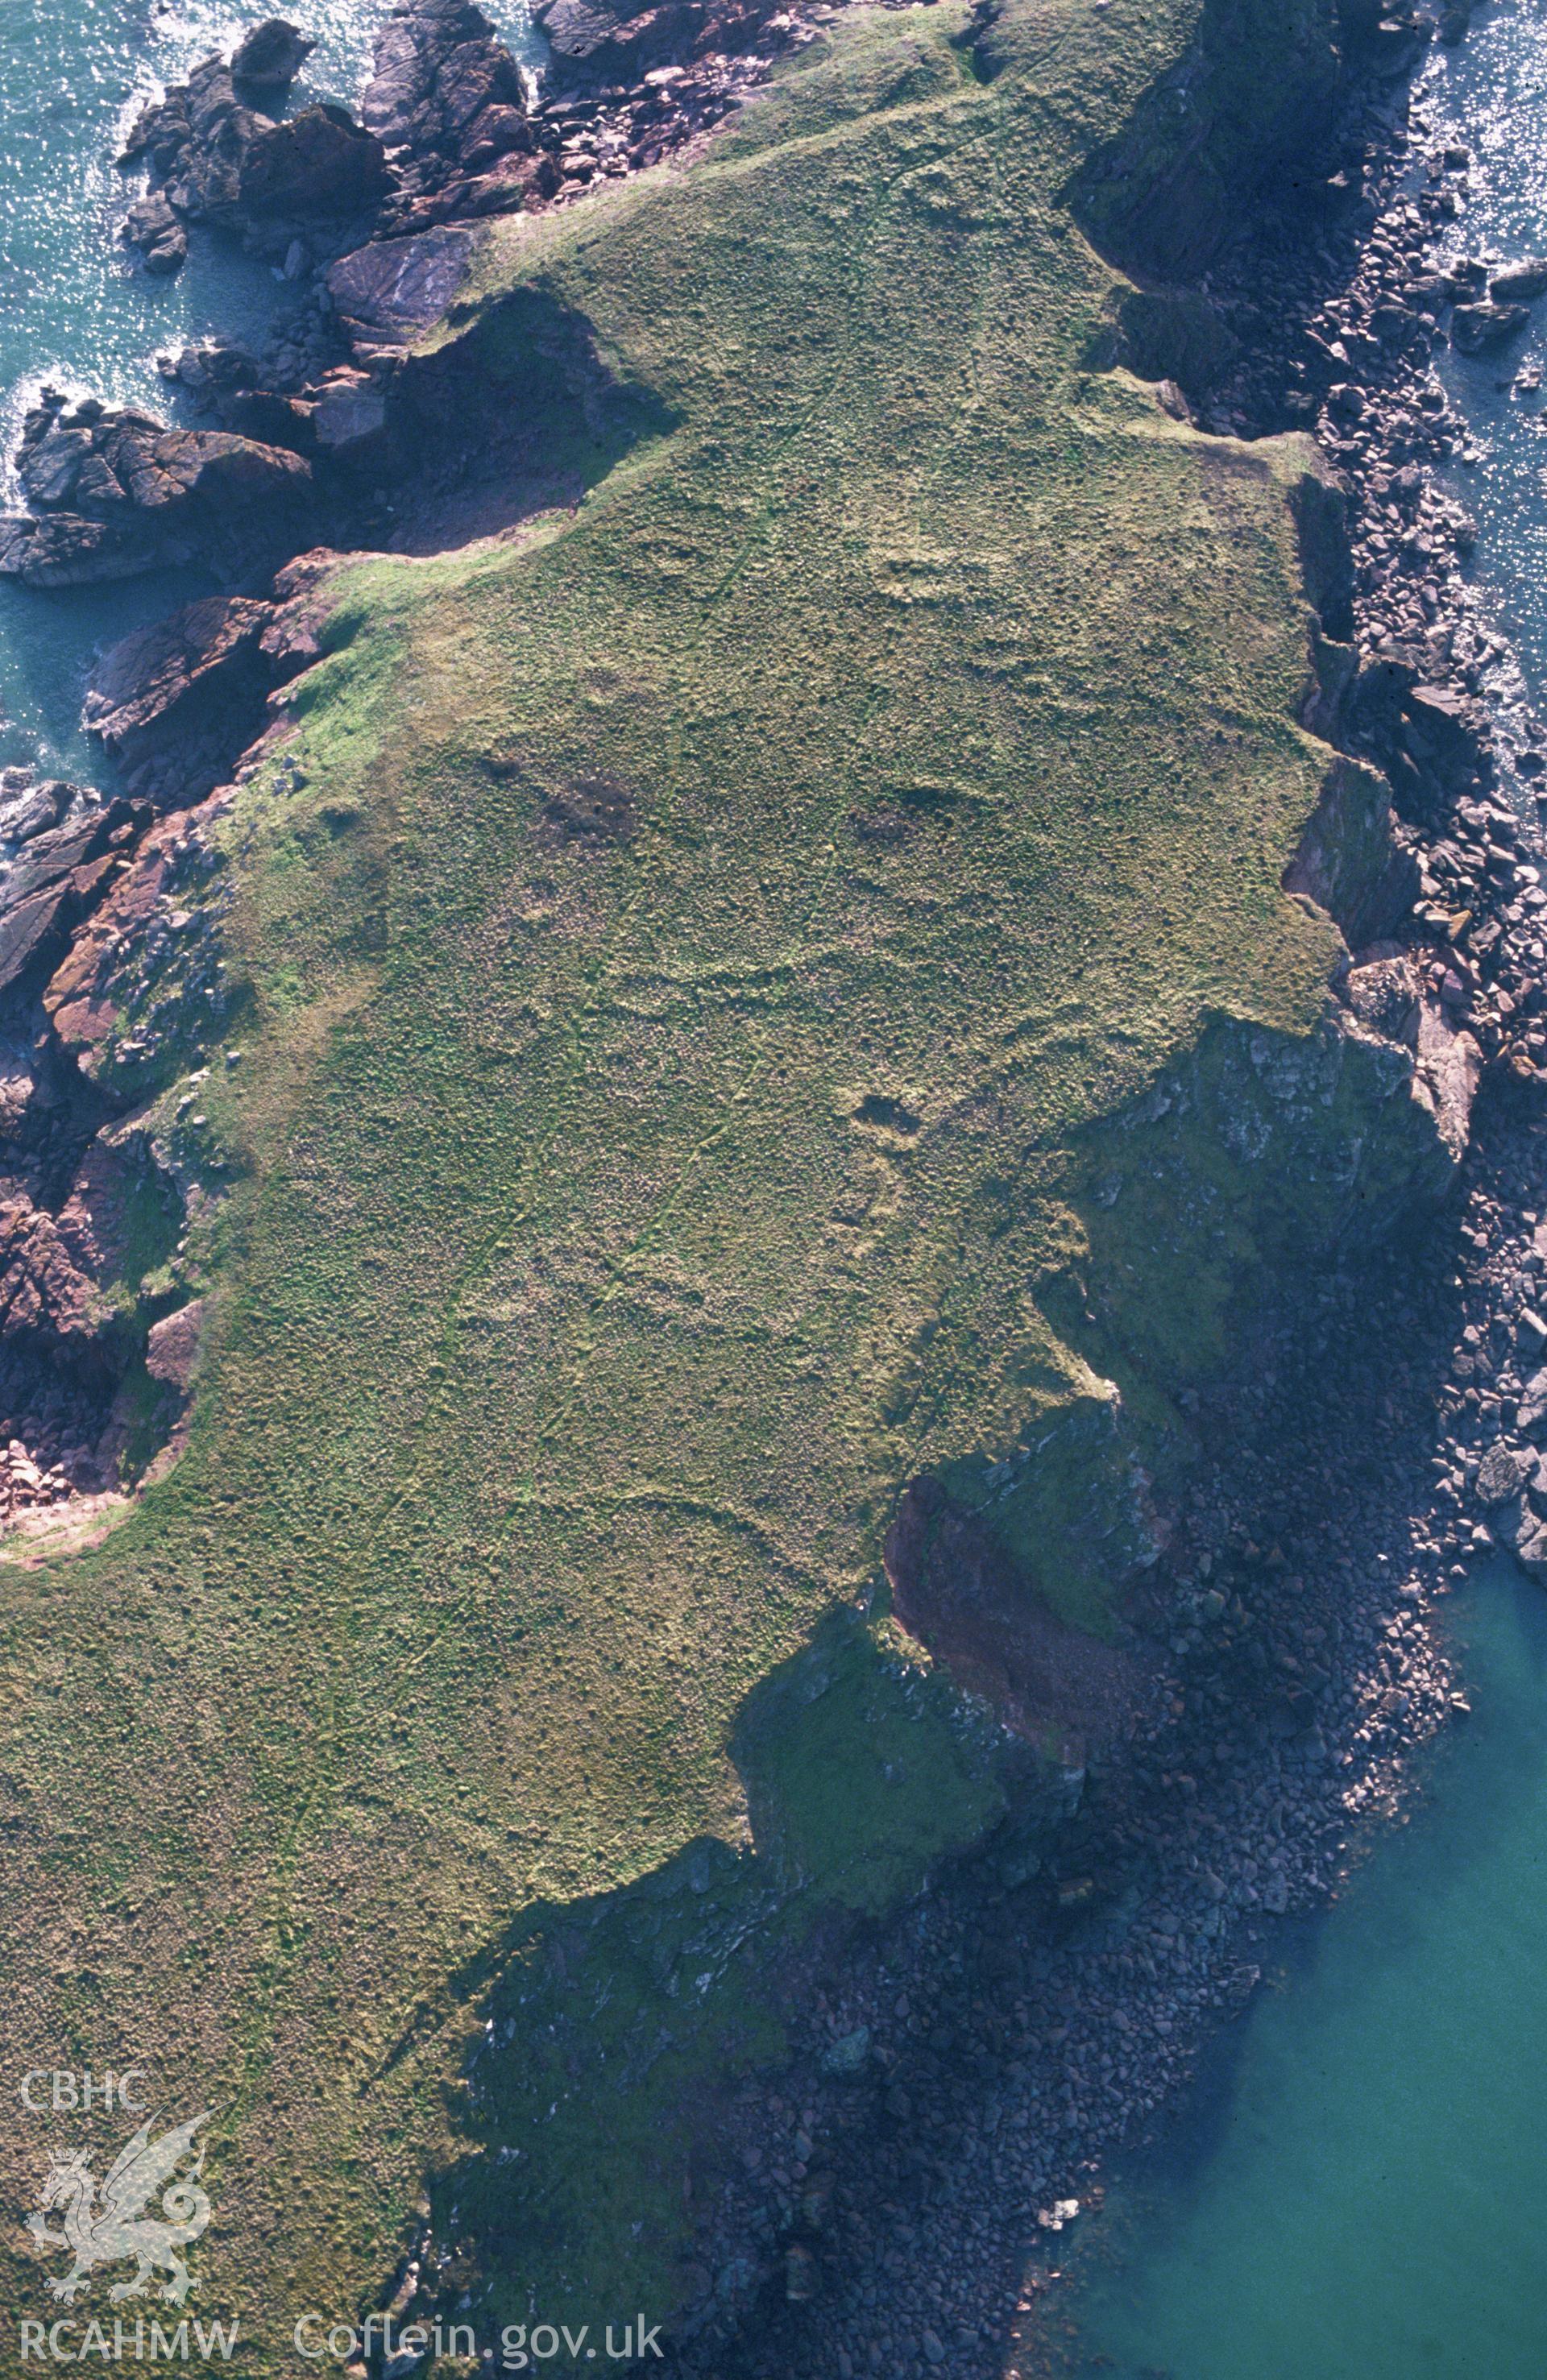 Slide of RCAHMW colour oblique aerial photograph of Gateholm Island, taken by C.R. Musson, 23/2/1993.